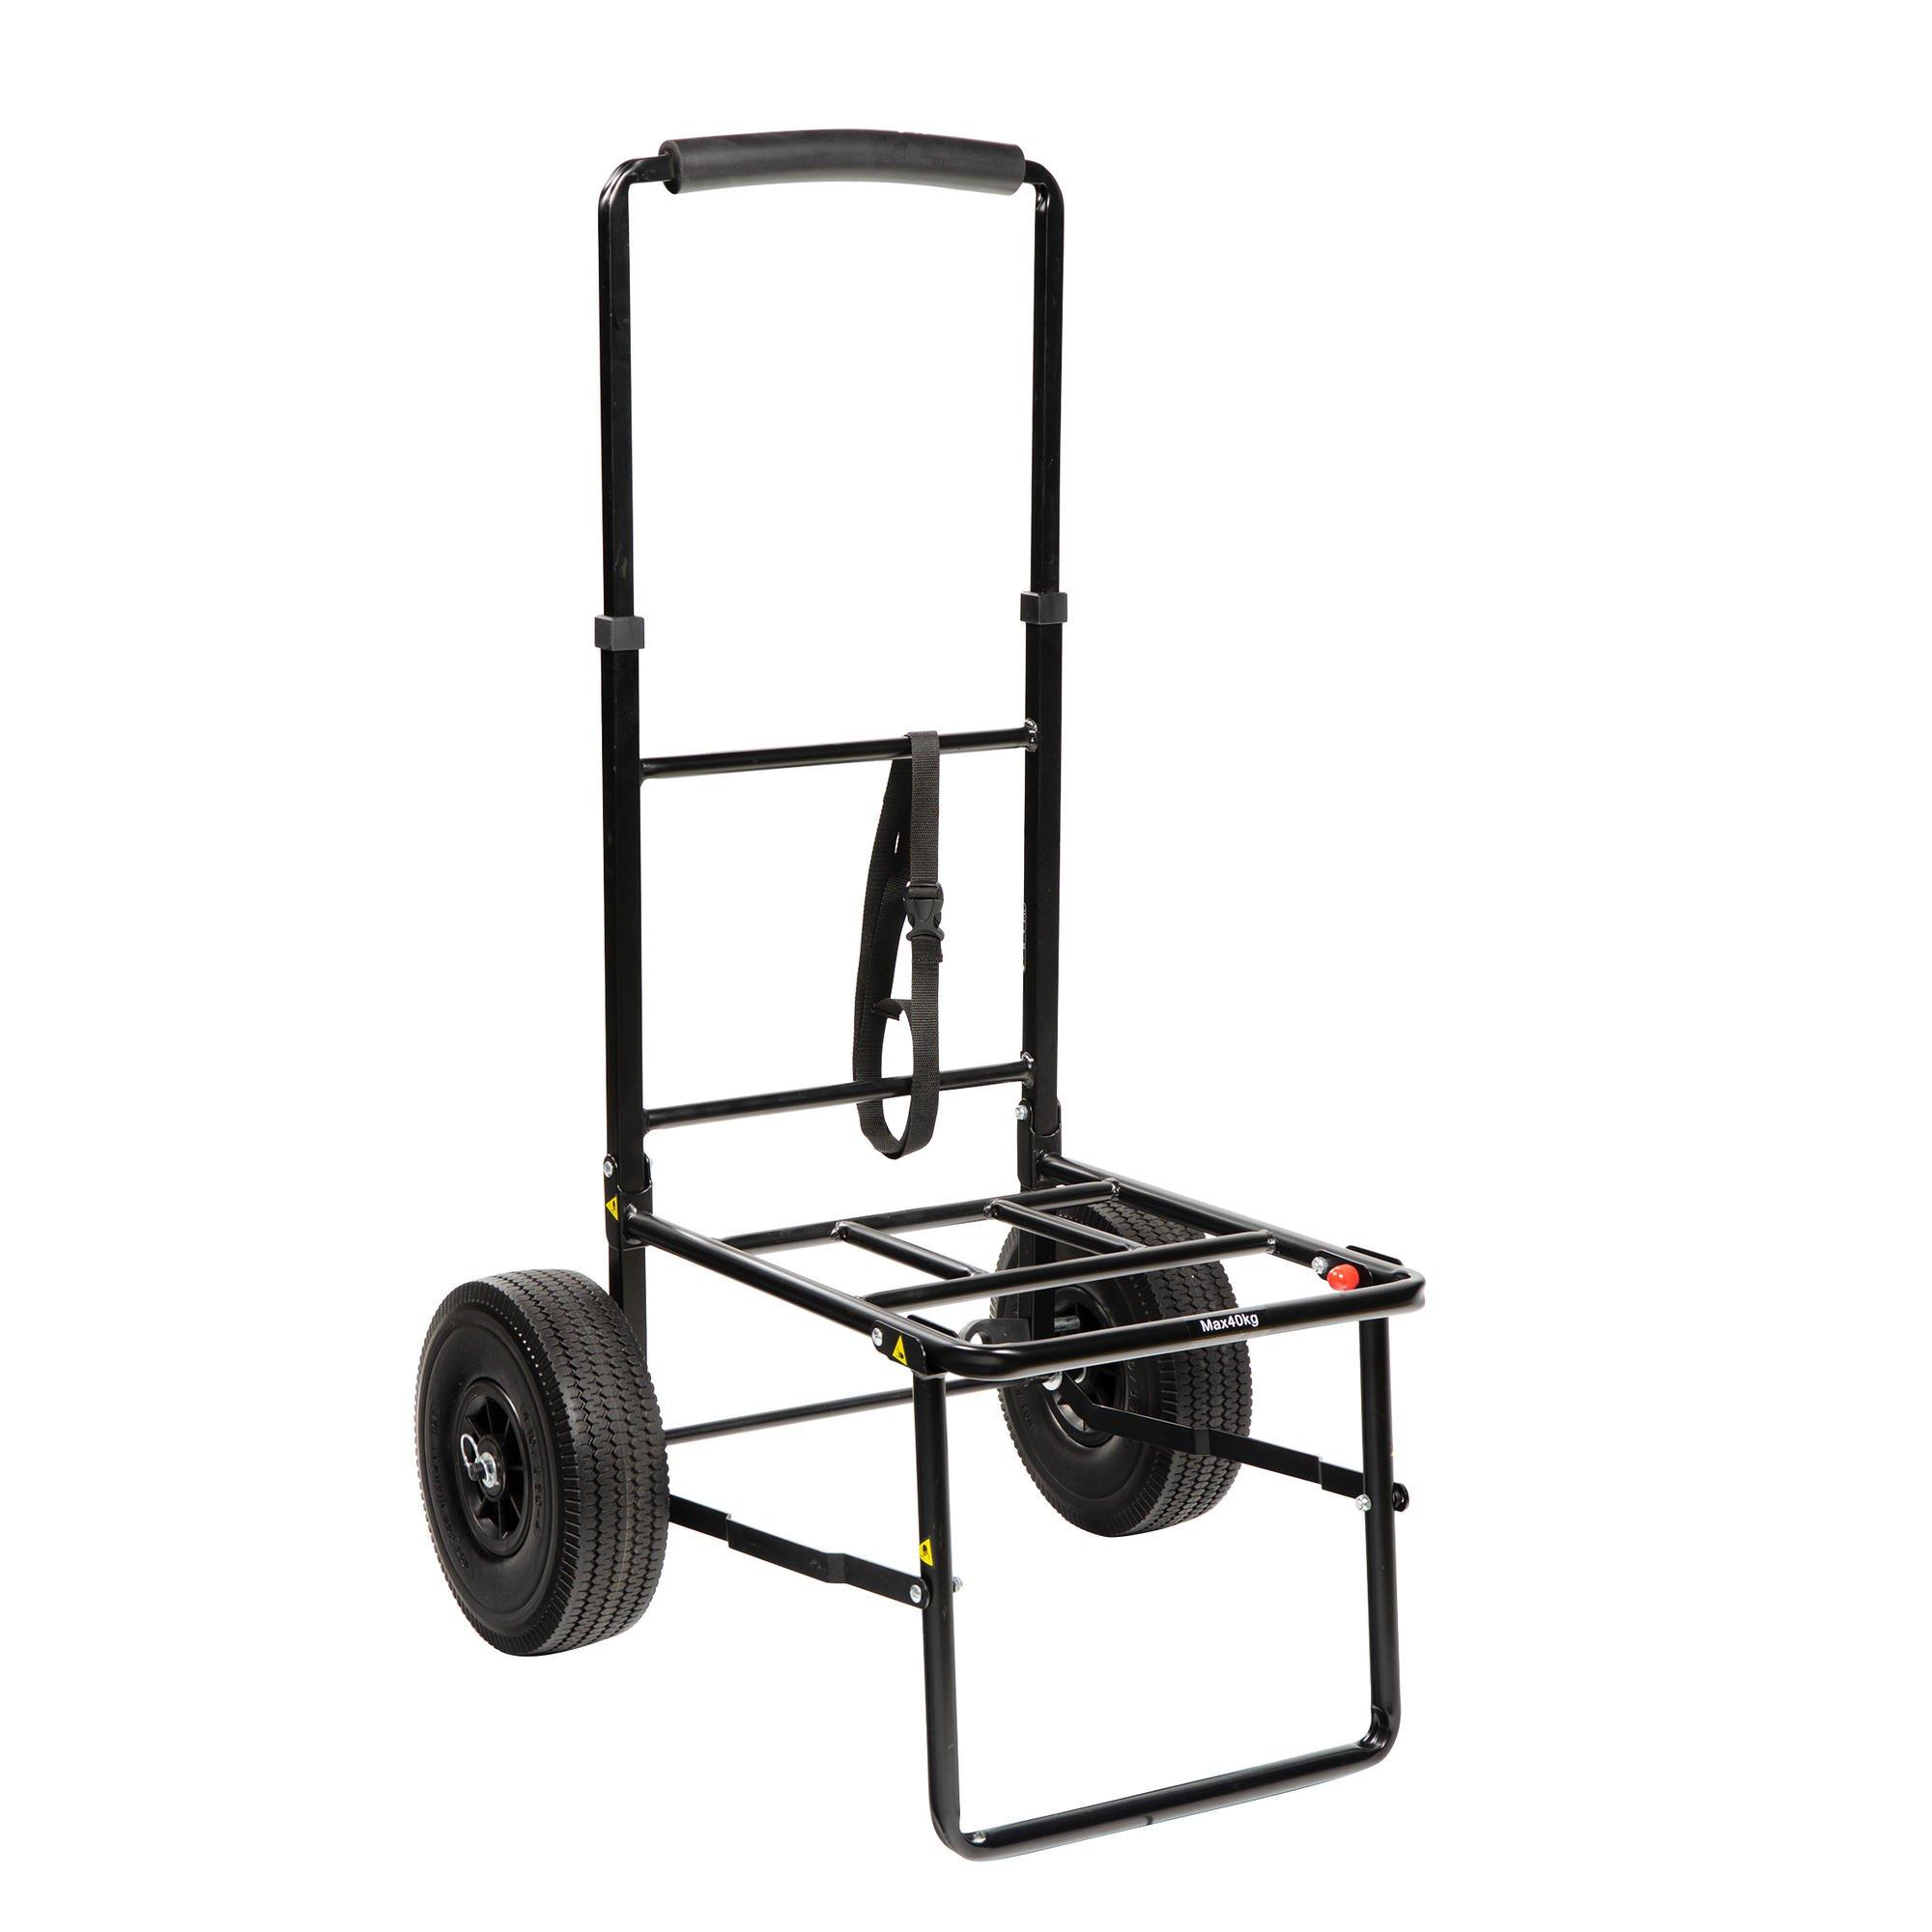 Decathlon Fishing Square Tube Trolley For Surfcasting